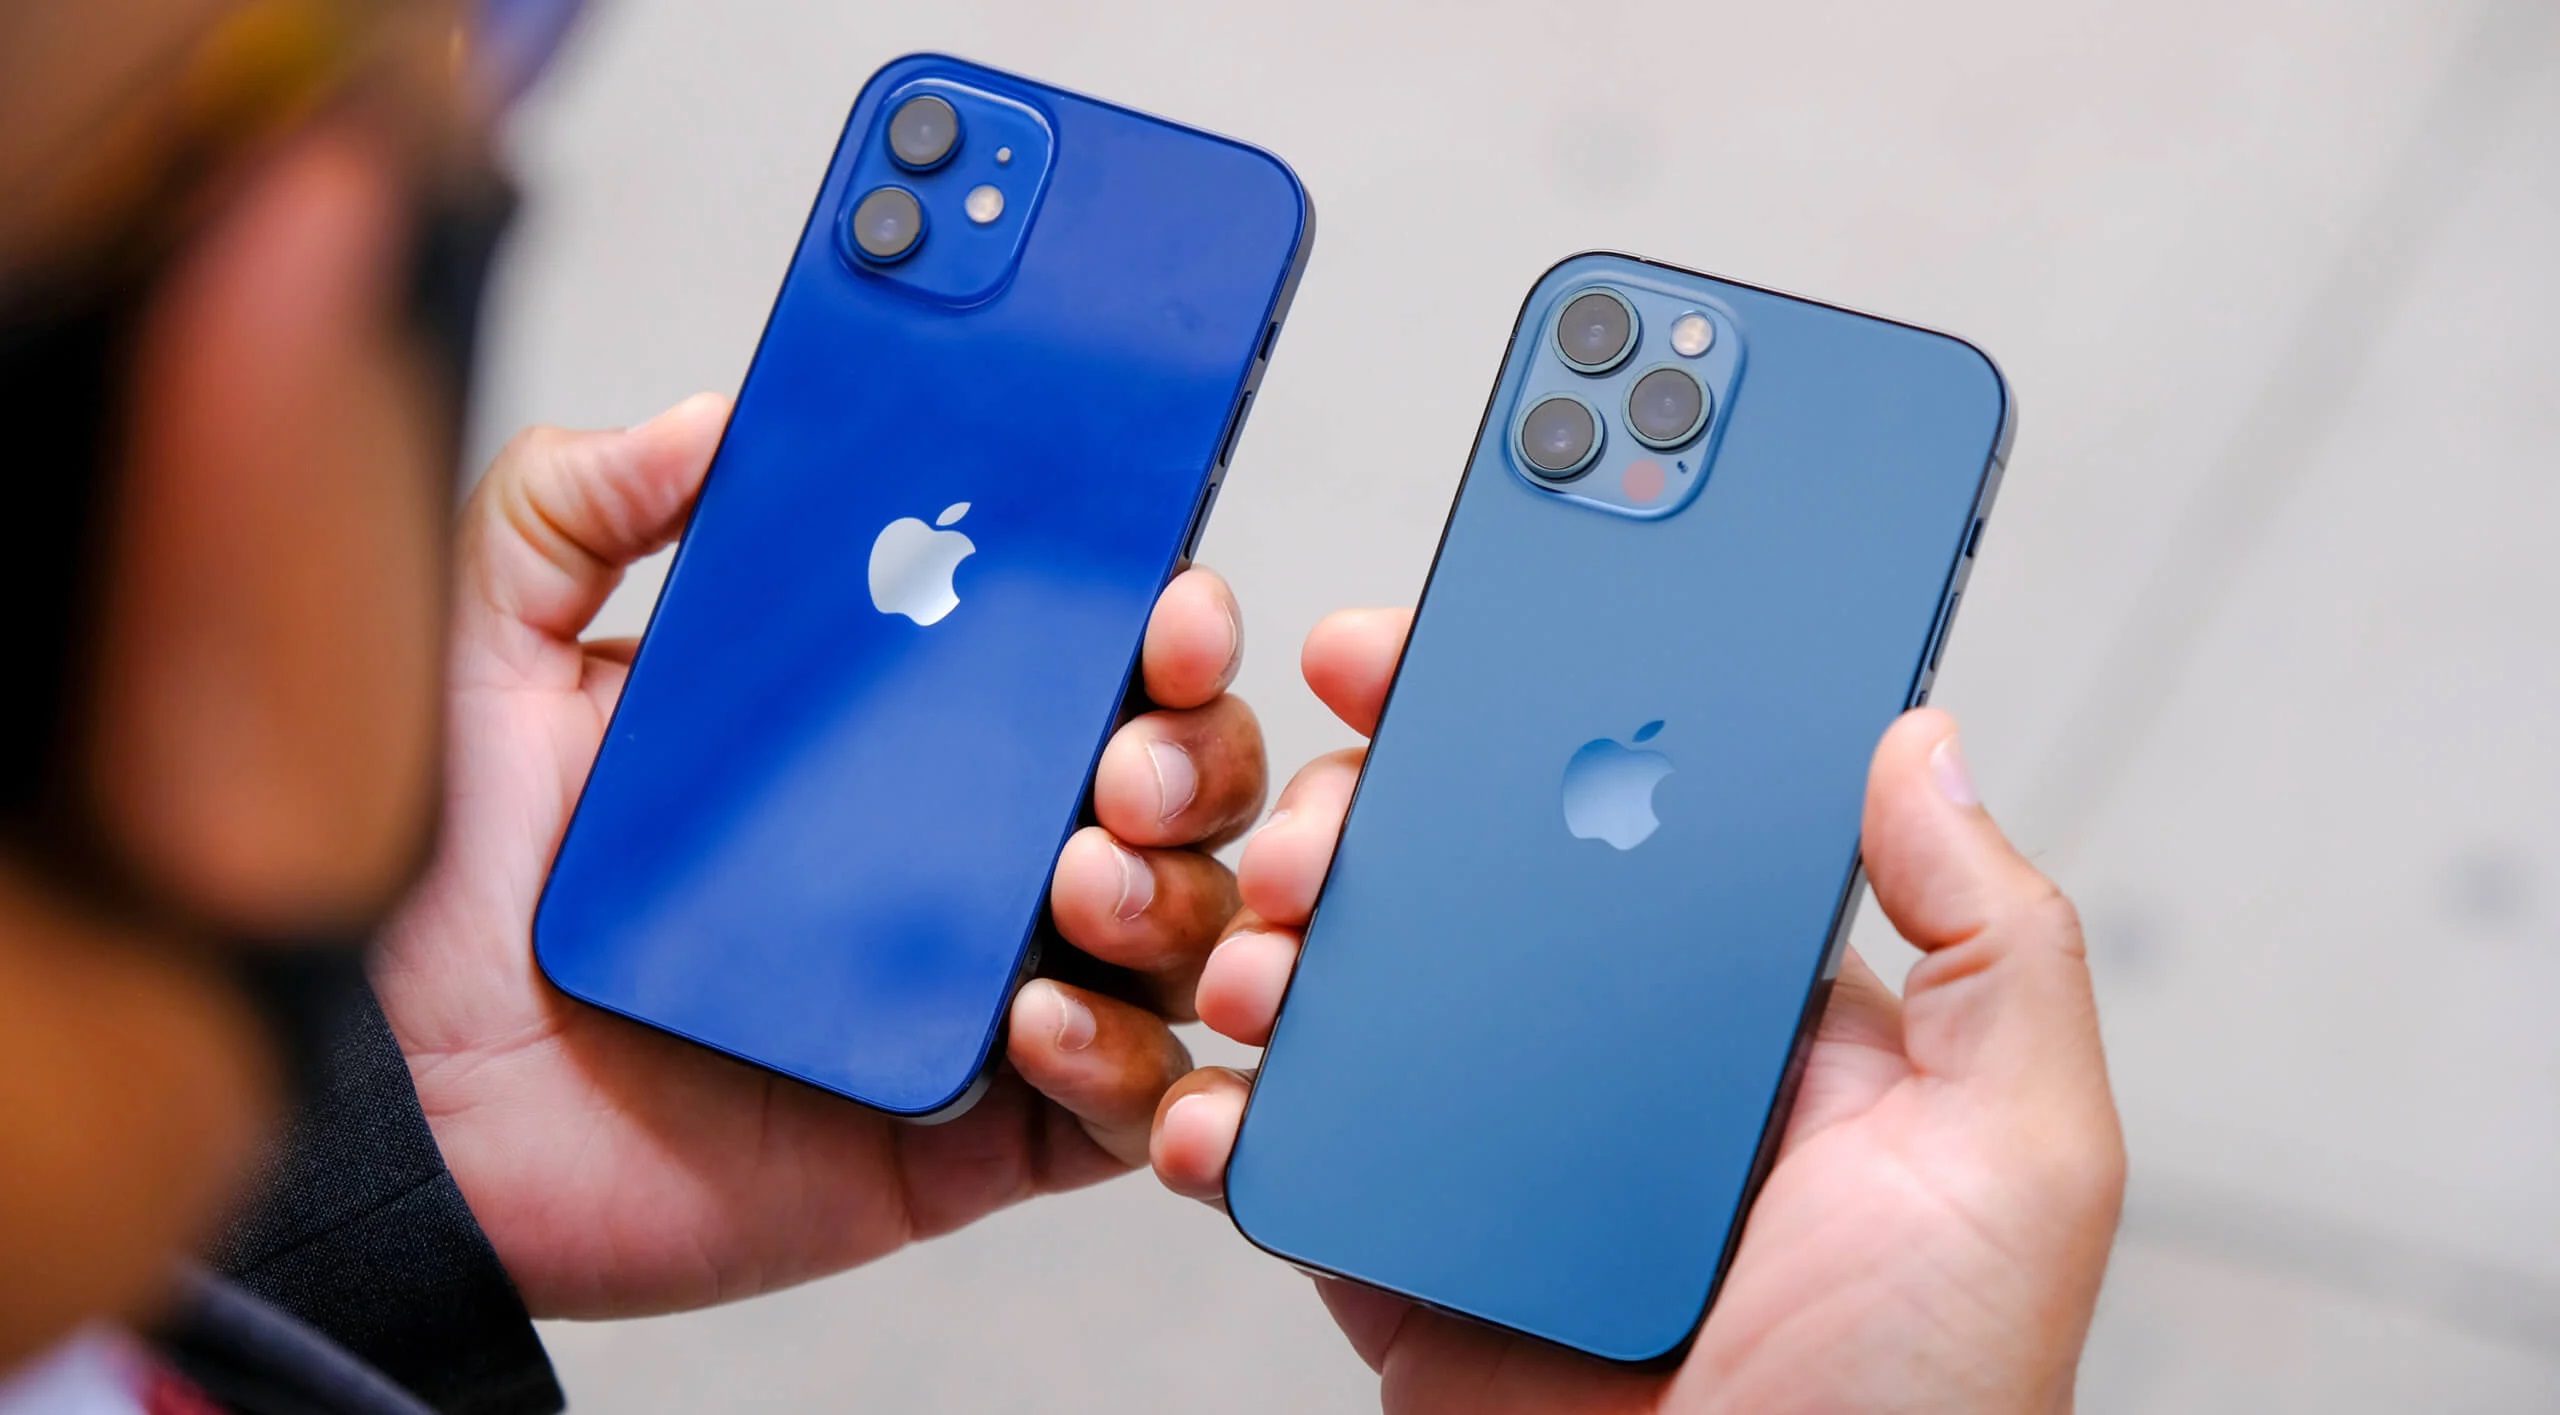 Apple admits serious defect in iPhone 12 and iPhone 12 Pro and promises to repair smartphones for free